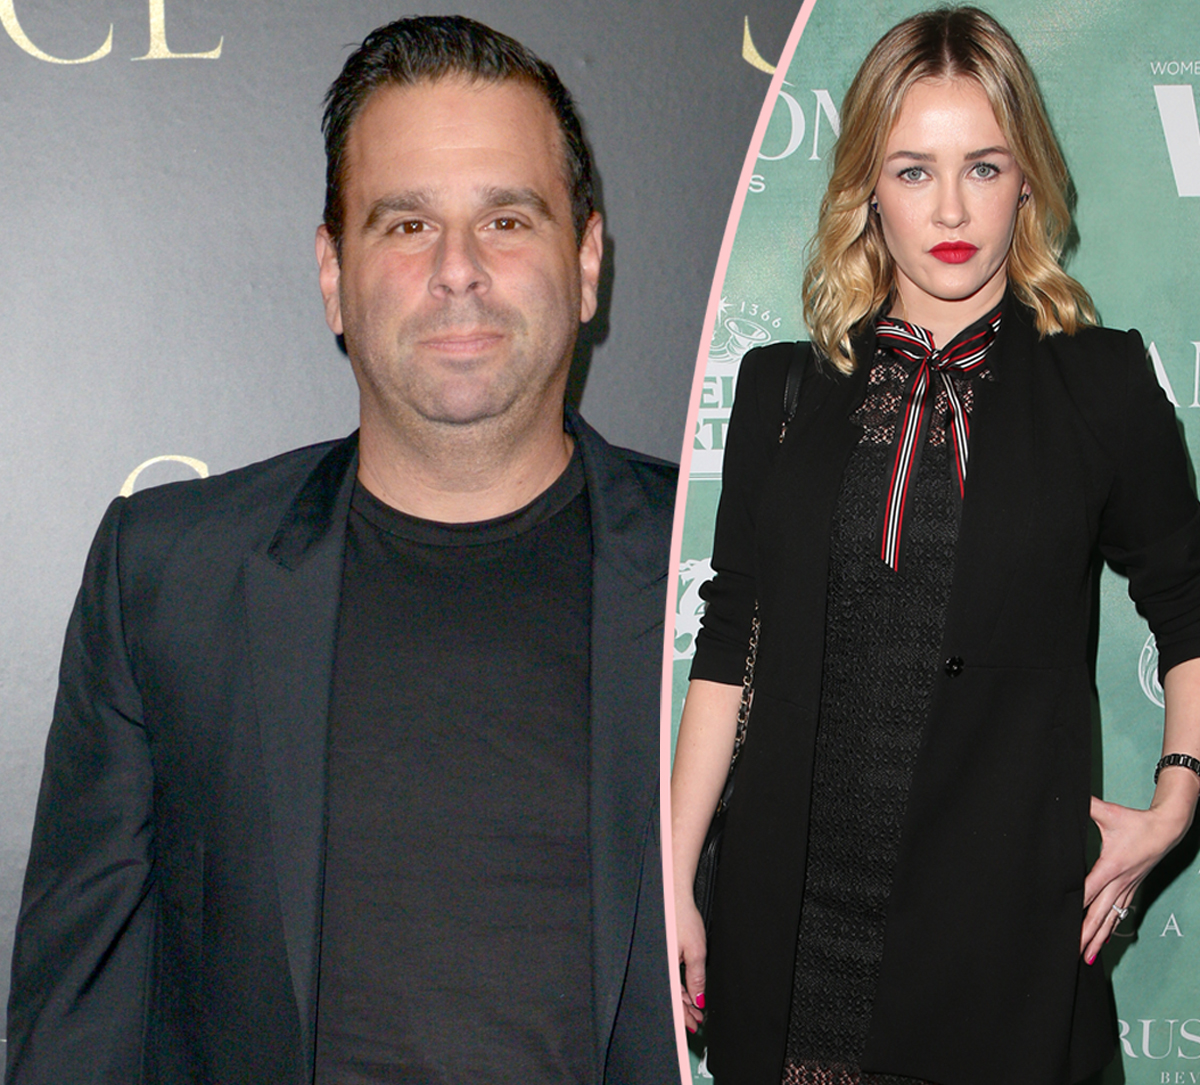 #Randall Emmett Shares Cryptic Post About Taking ‘The High Road’ Amid Ex Ambyr Childers’ Allegations